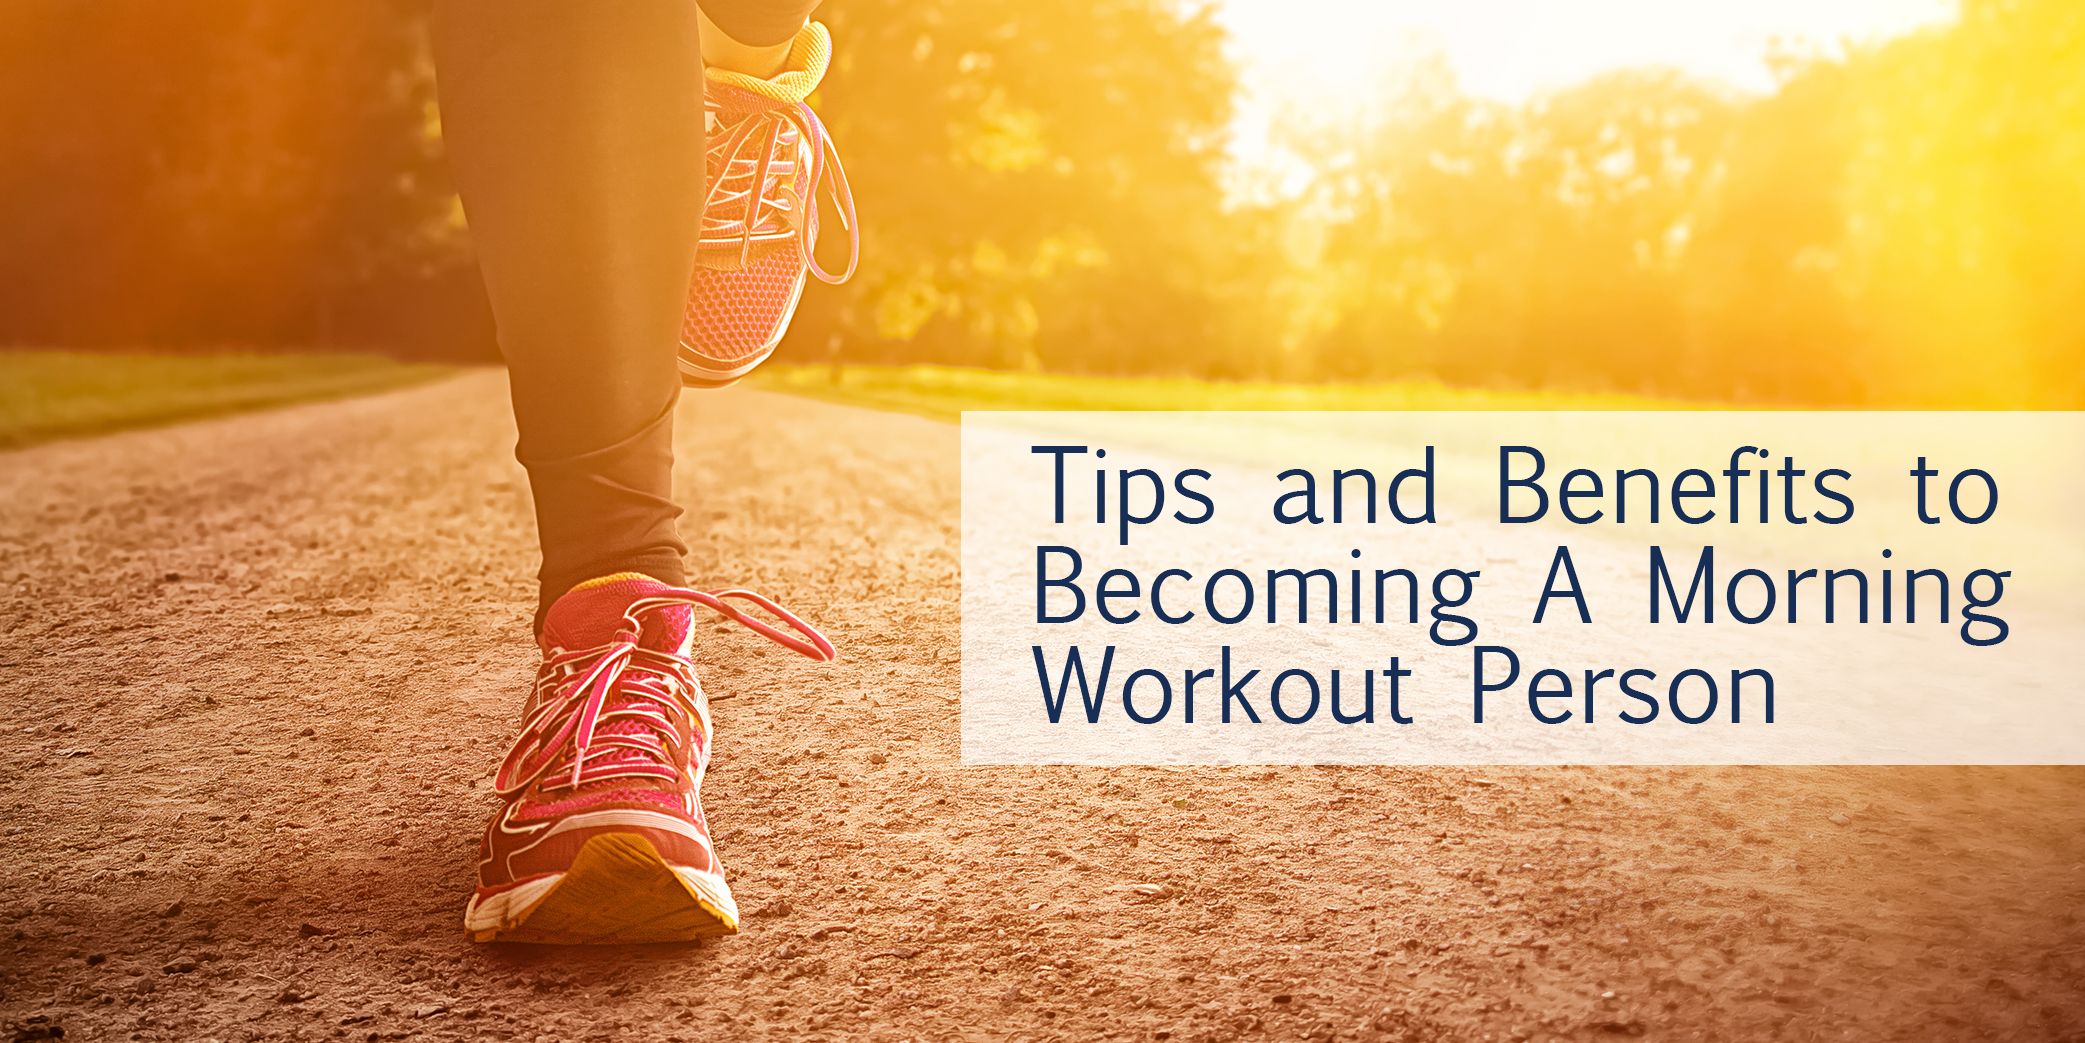 Tips and benefits to becoming a morning workout person